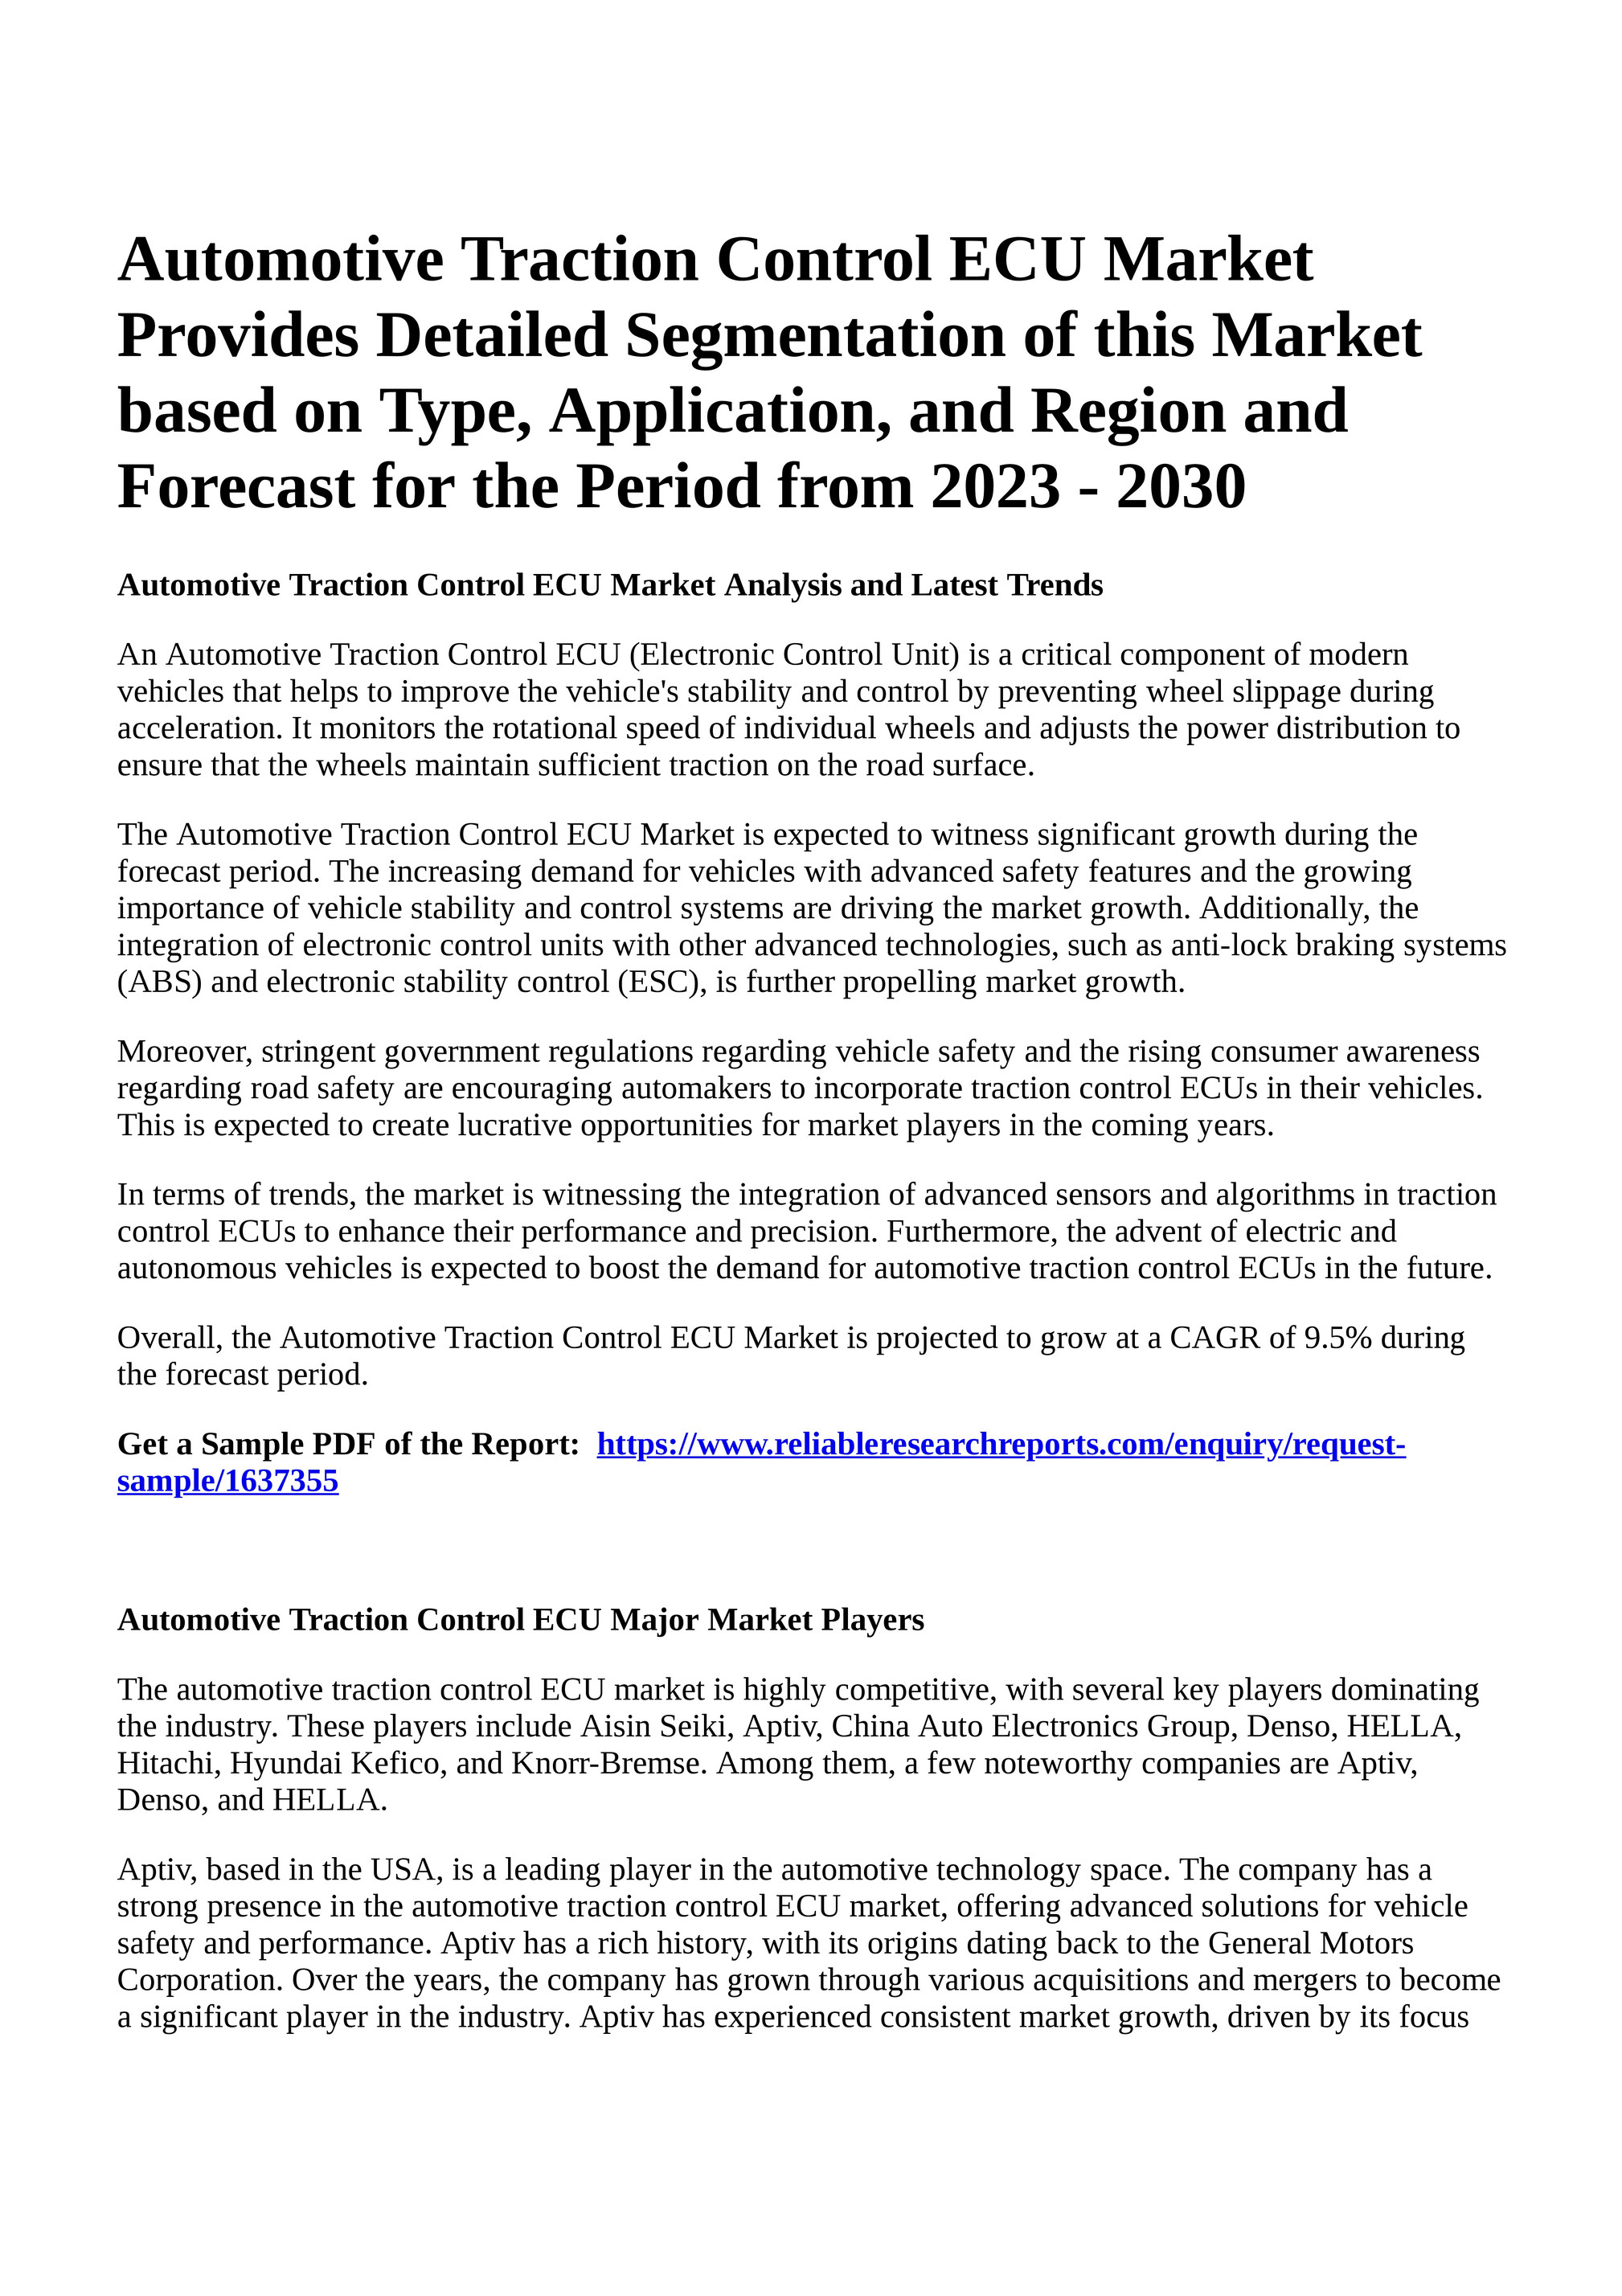 Reportprime - Automotive Traction Control ECU Market Provides Detailed  Segmentation of this Market based on Type, Application, and Region and  Forecast for the Period from 2023 - 2030 - Page 1